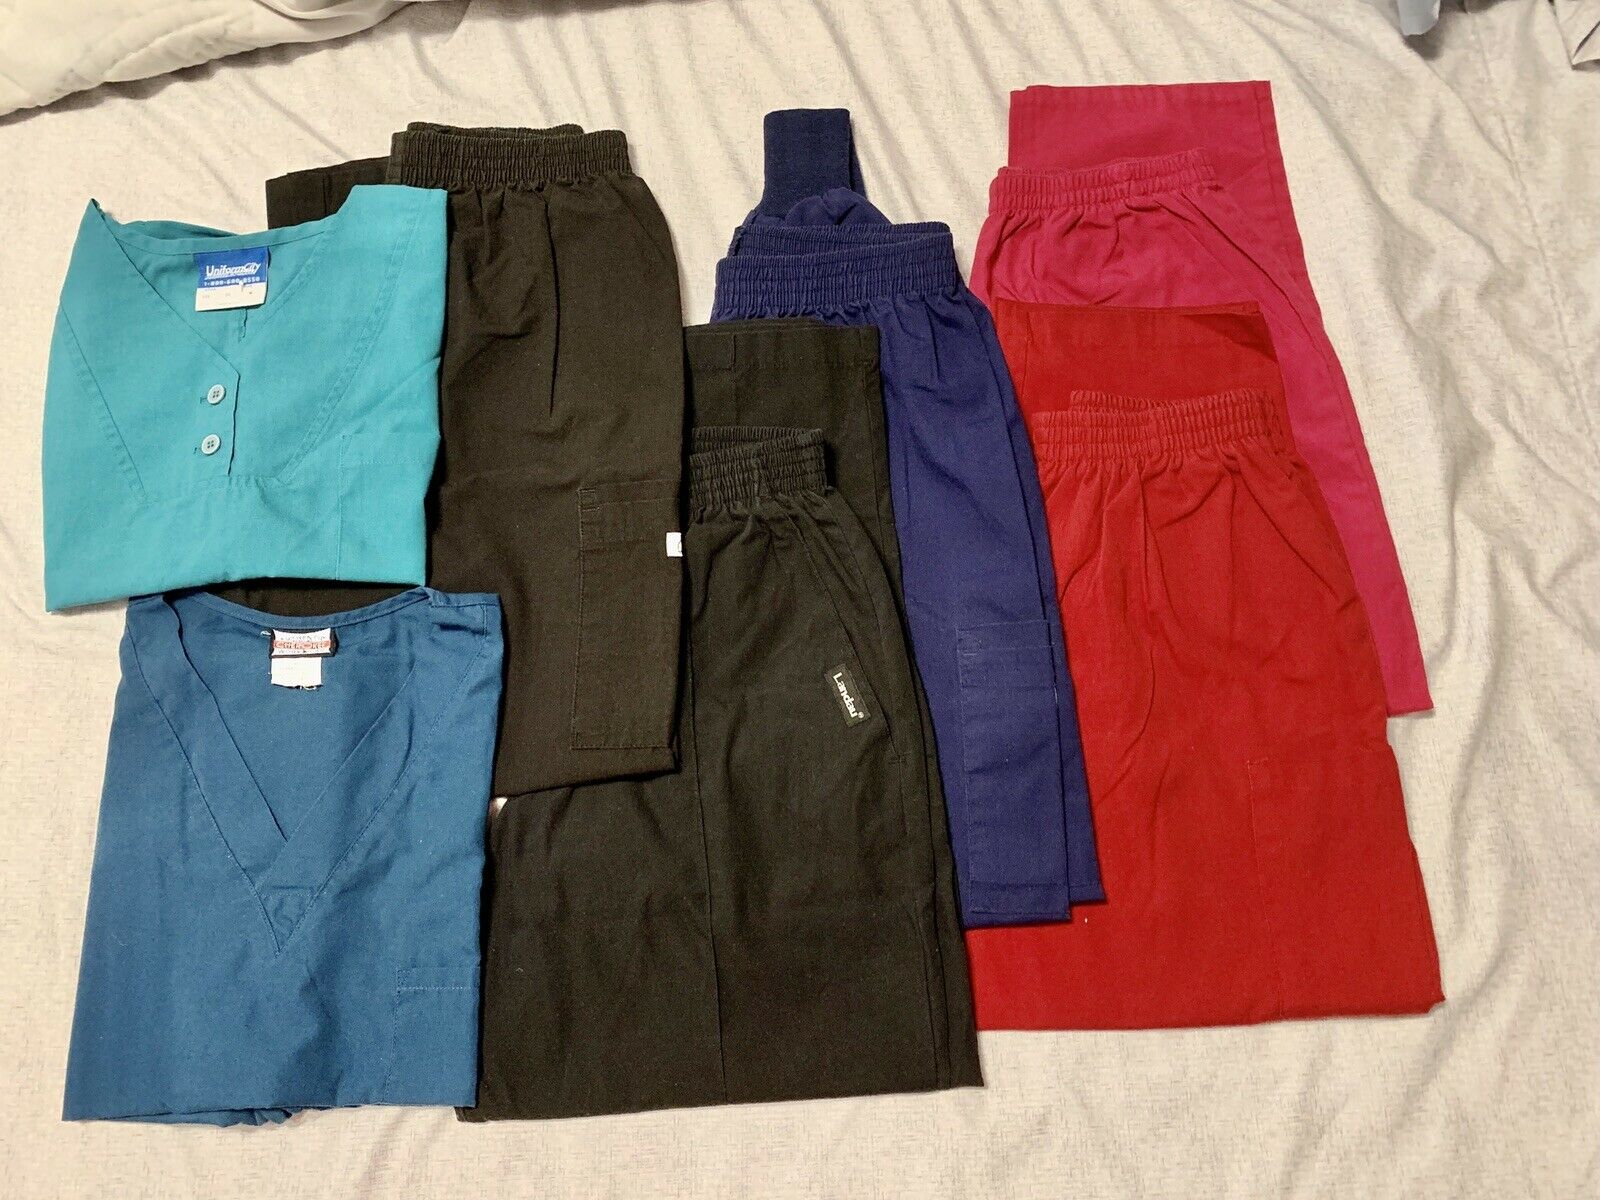 Healthcare Scrubs 7 Pieces - 5 Pants 2 Shirts; Lightly Used. Fit A 5’ 3” Person